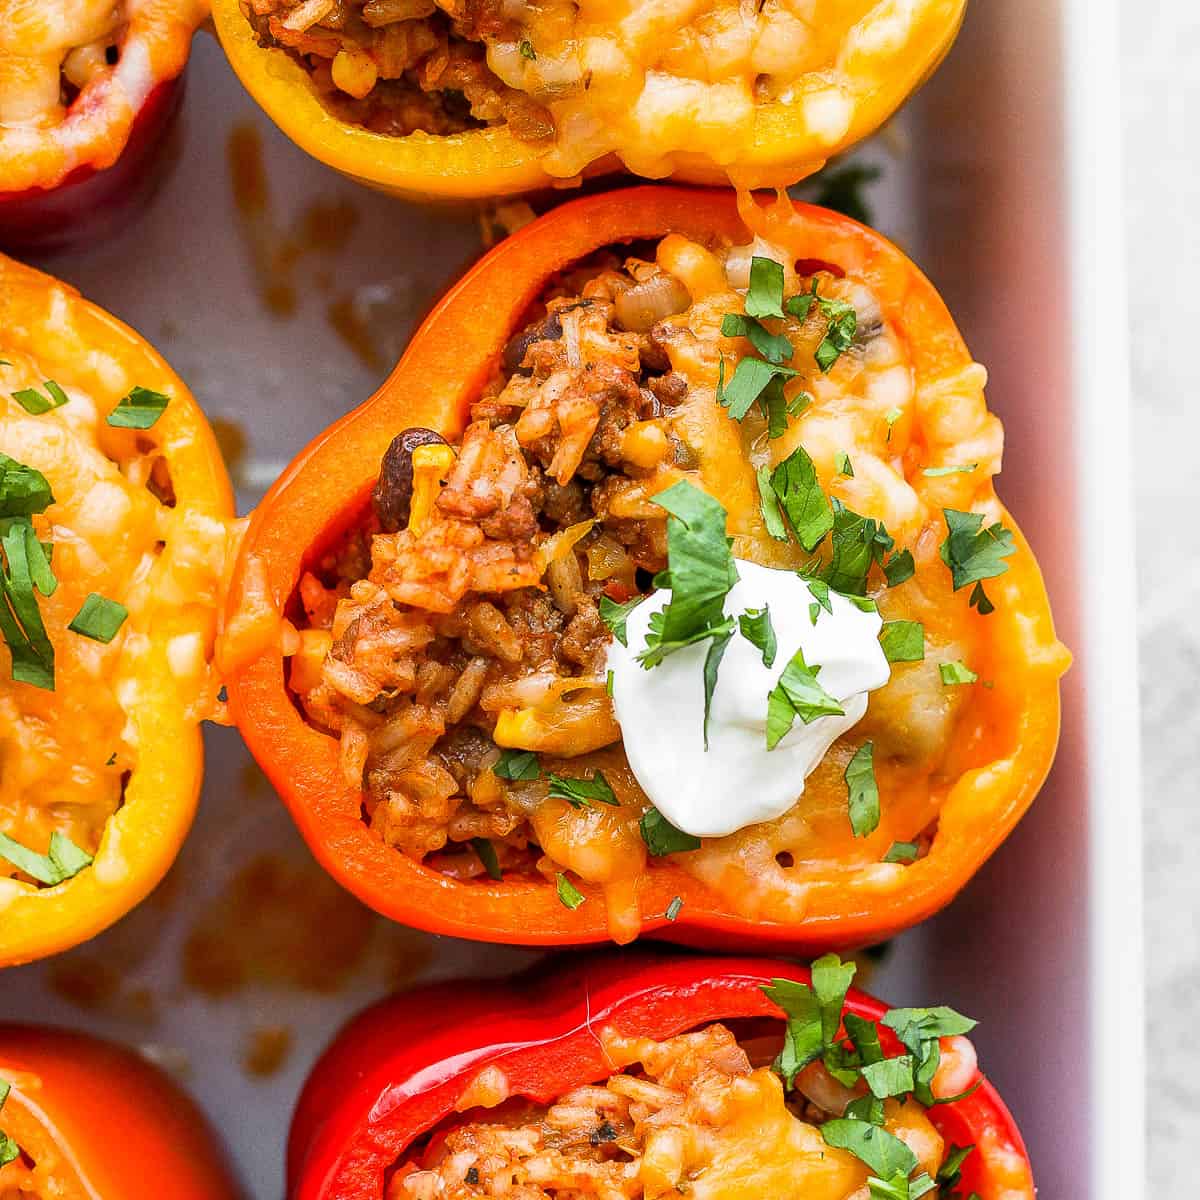 Pan full of mexican stuffed peppers with melted cheese and garnished with sour cream and cilantro,